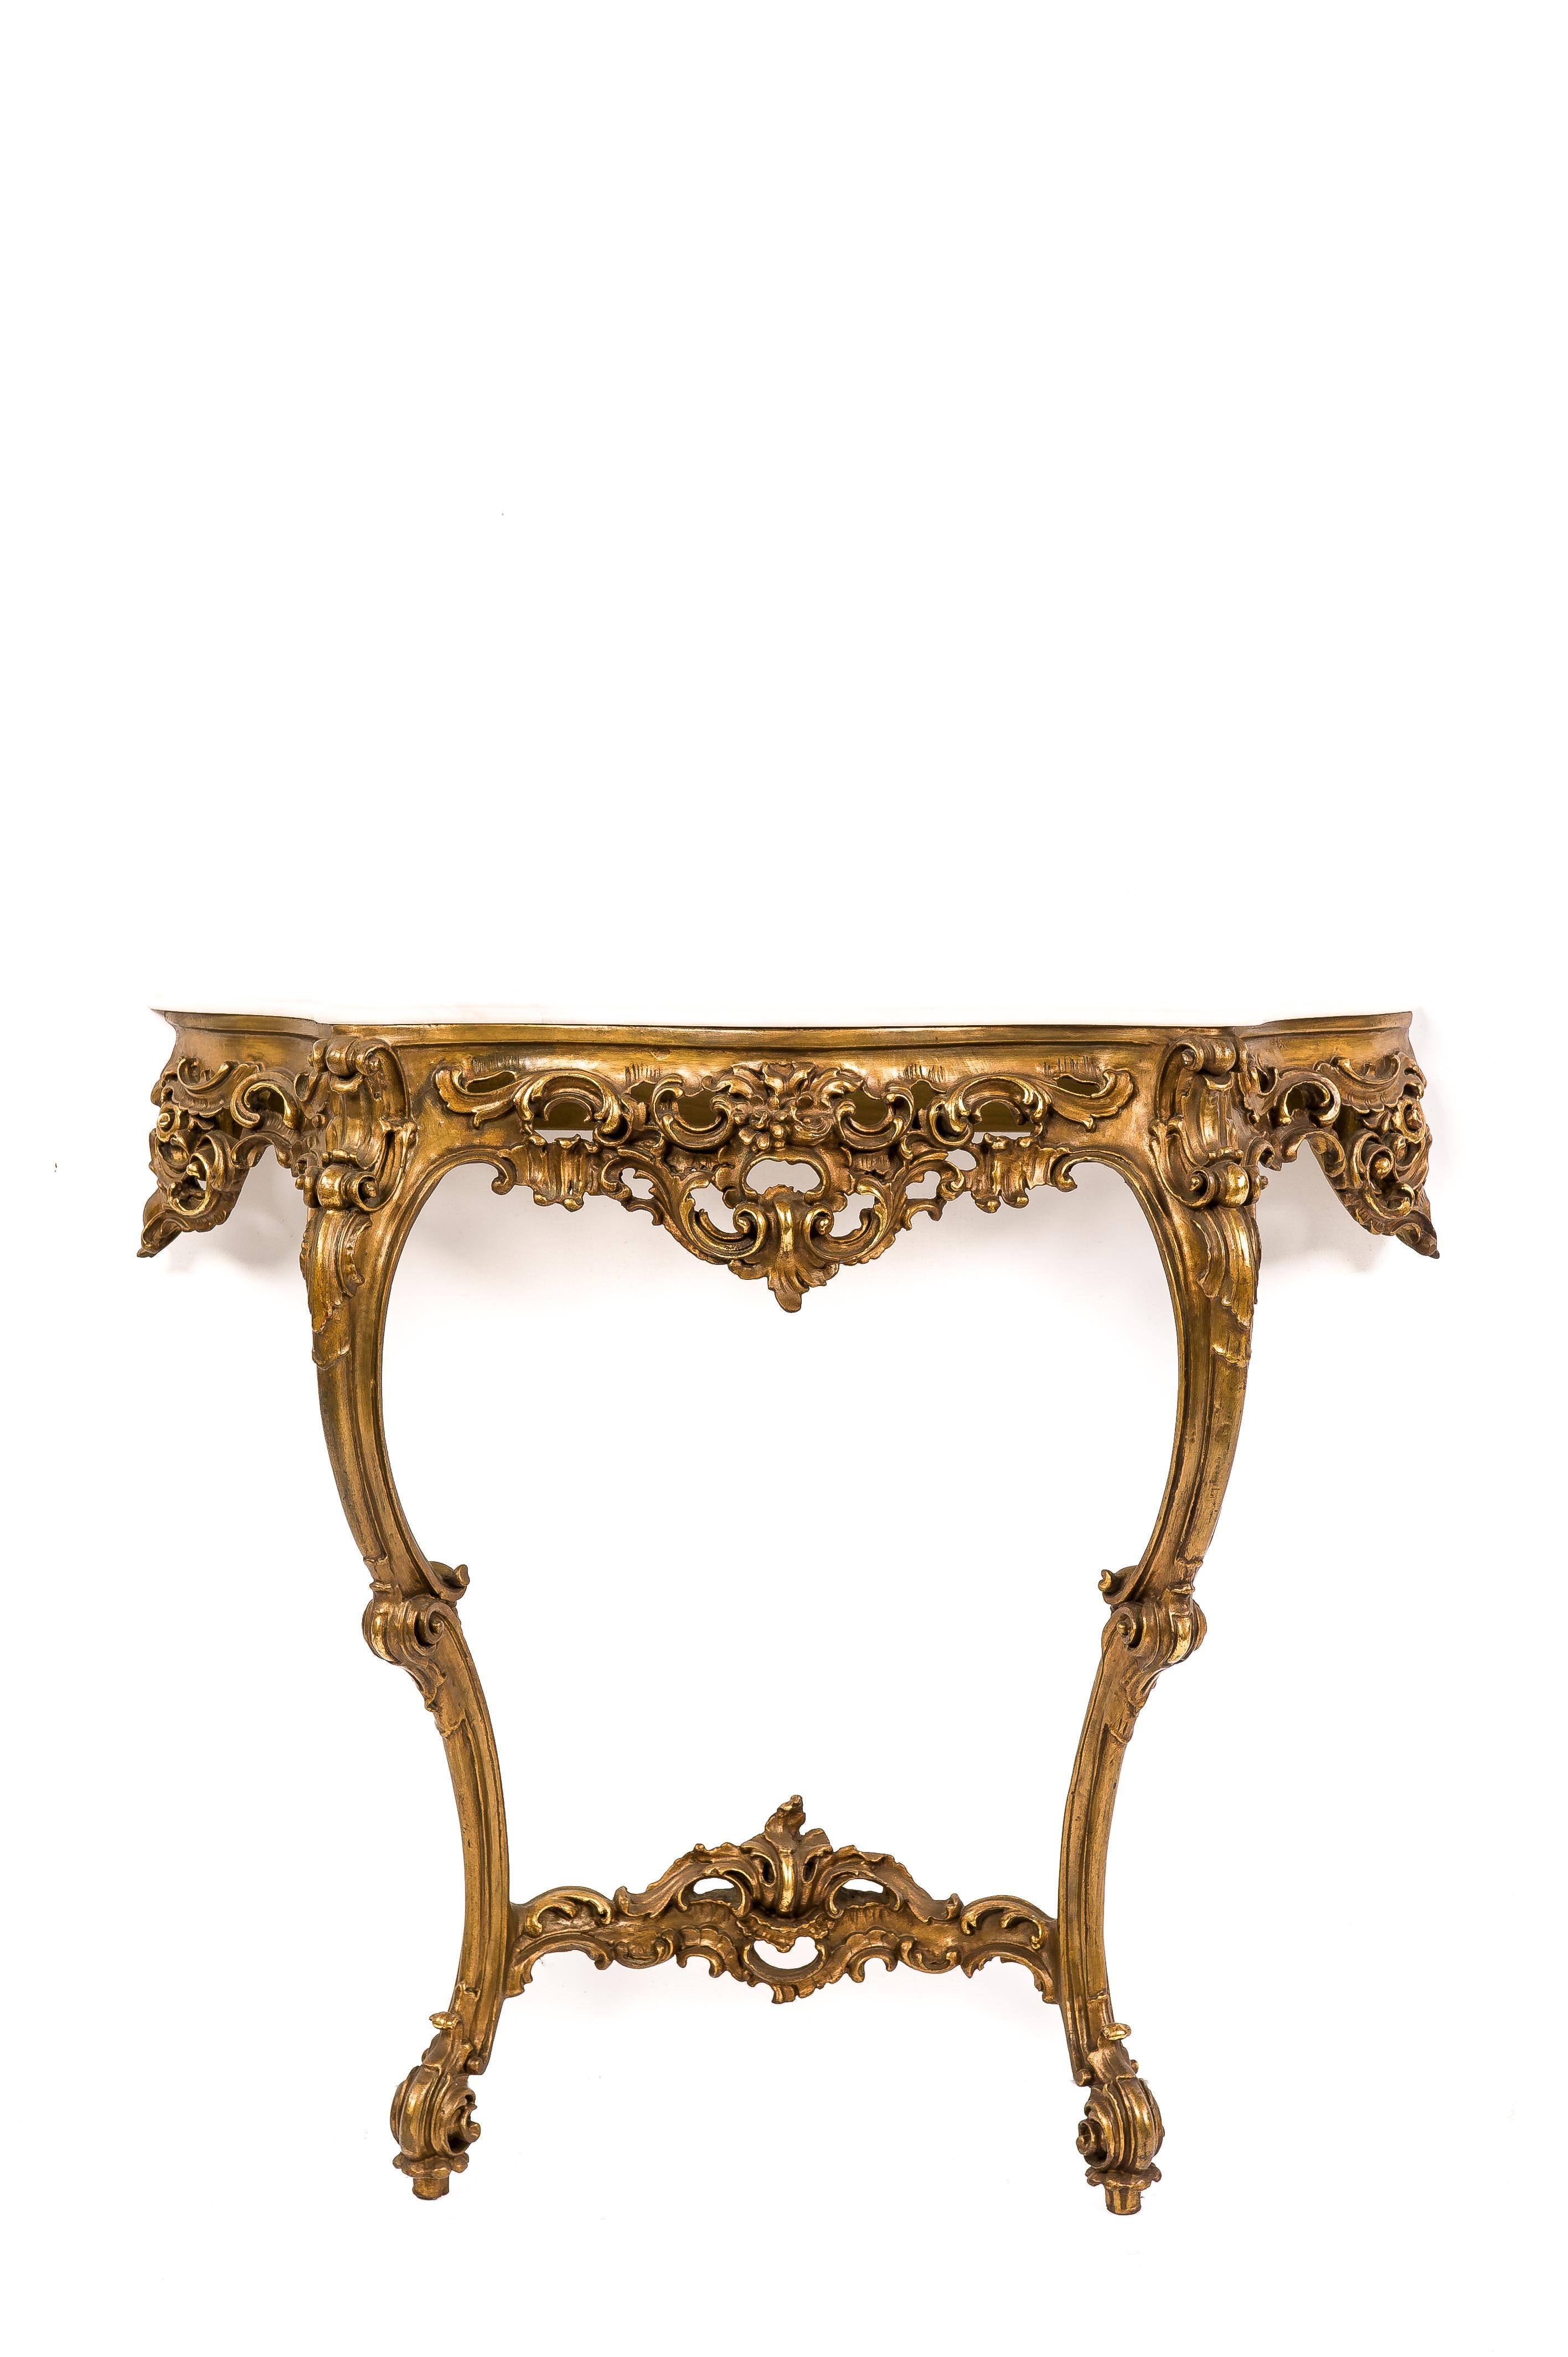 Early 20th Century Italian Baroque Carved Giltwood Console Table with Mirror For Sale 12